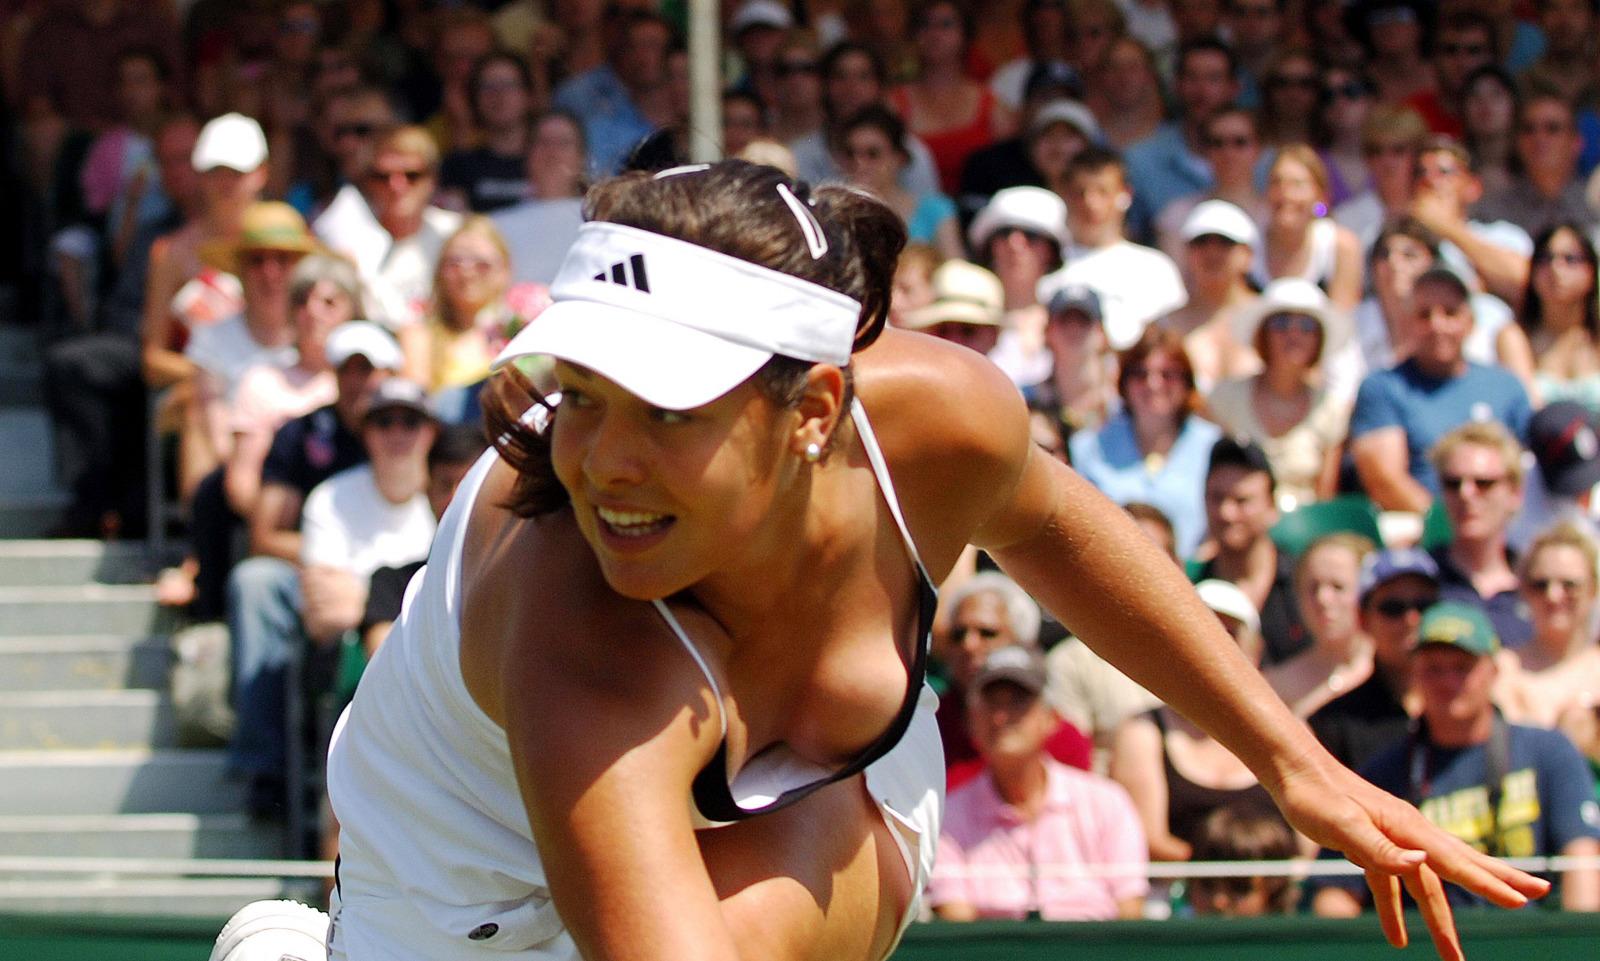 Ana Ivanovic porn images naked ana ivanovic added by gwen ariano, naked .....